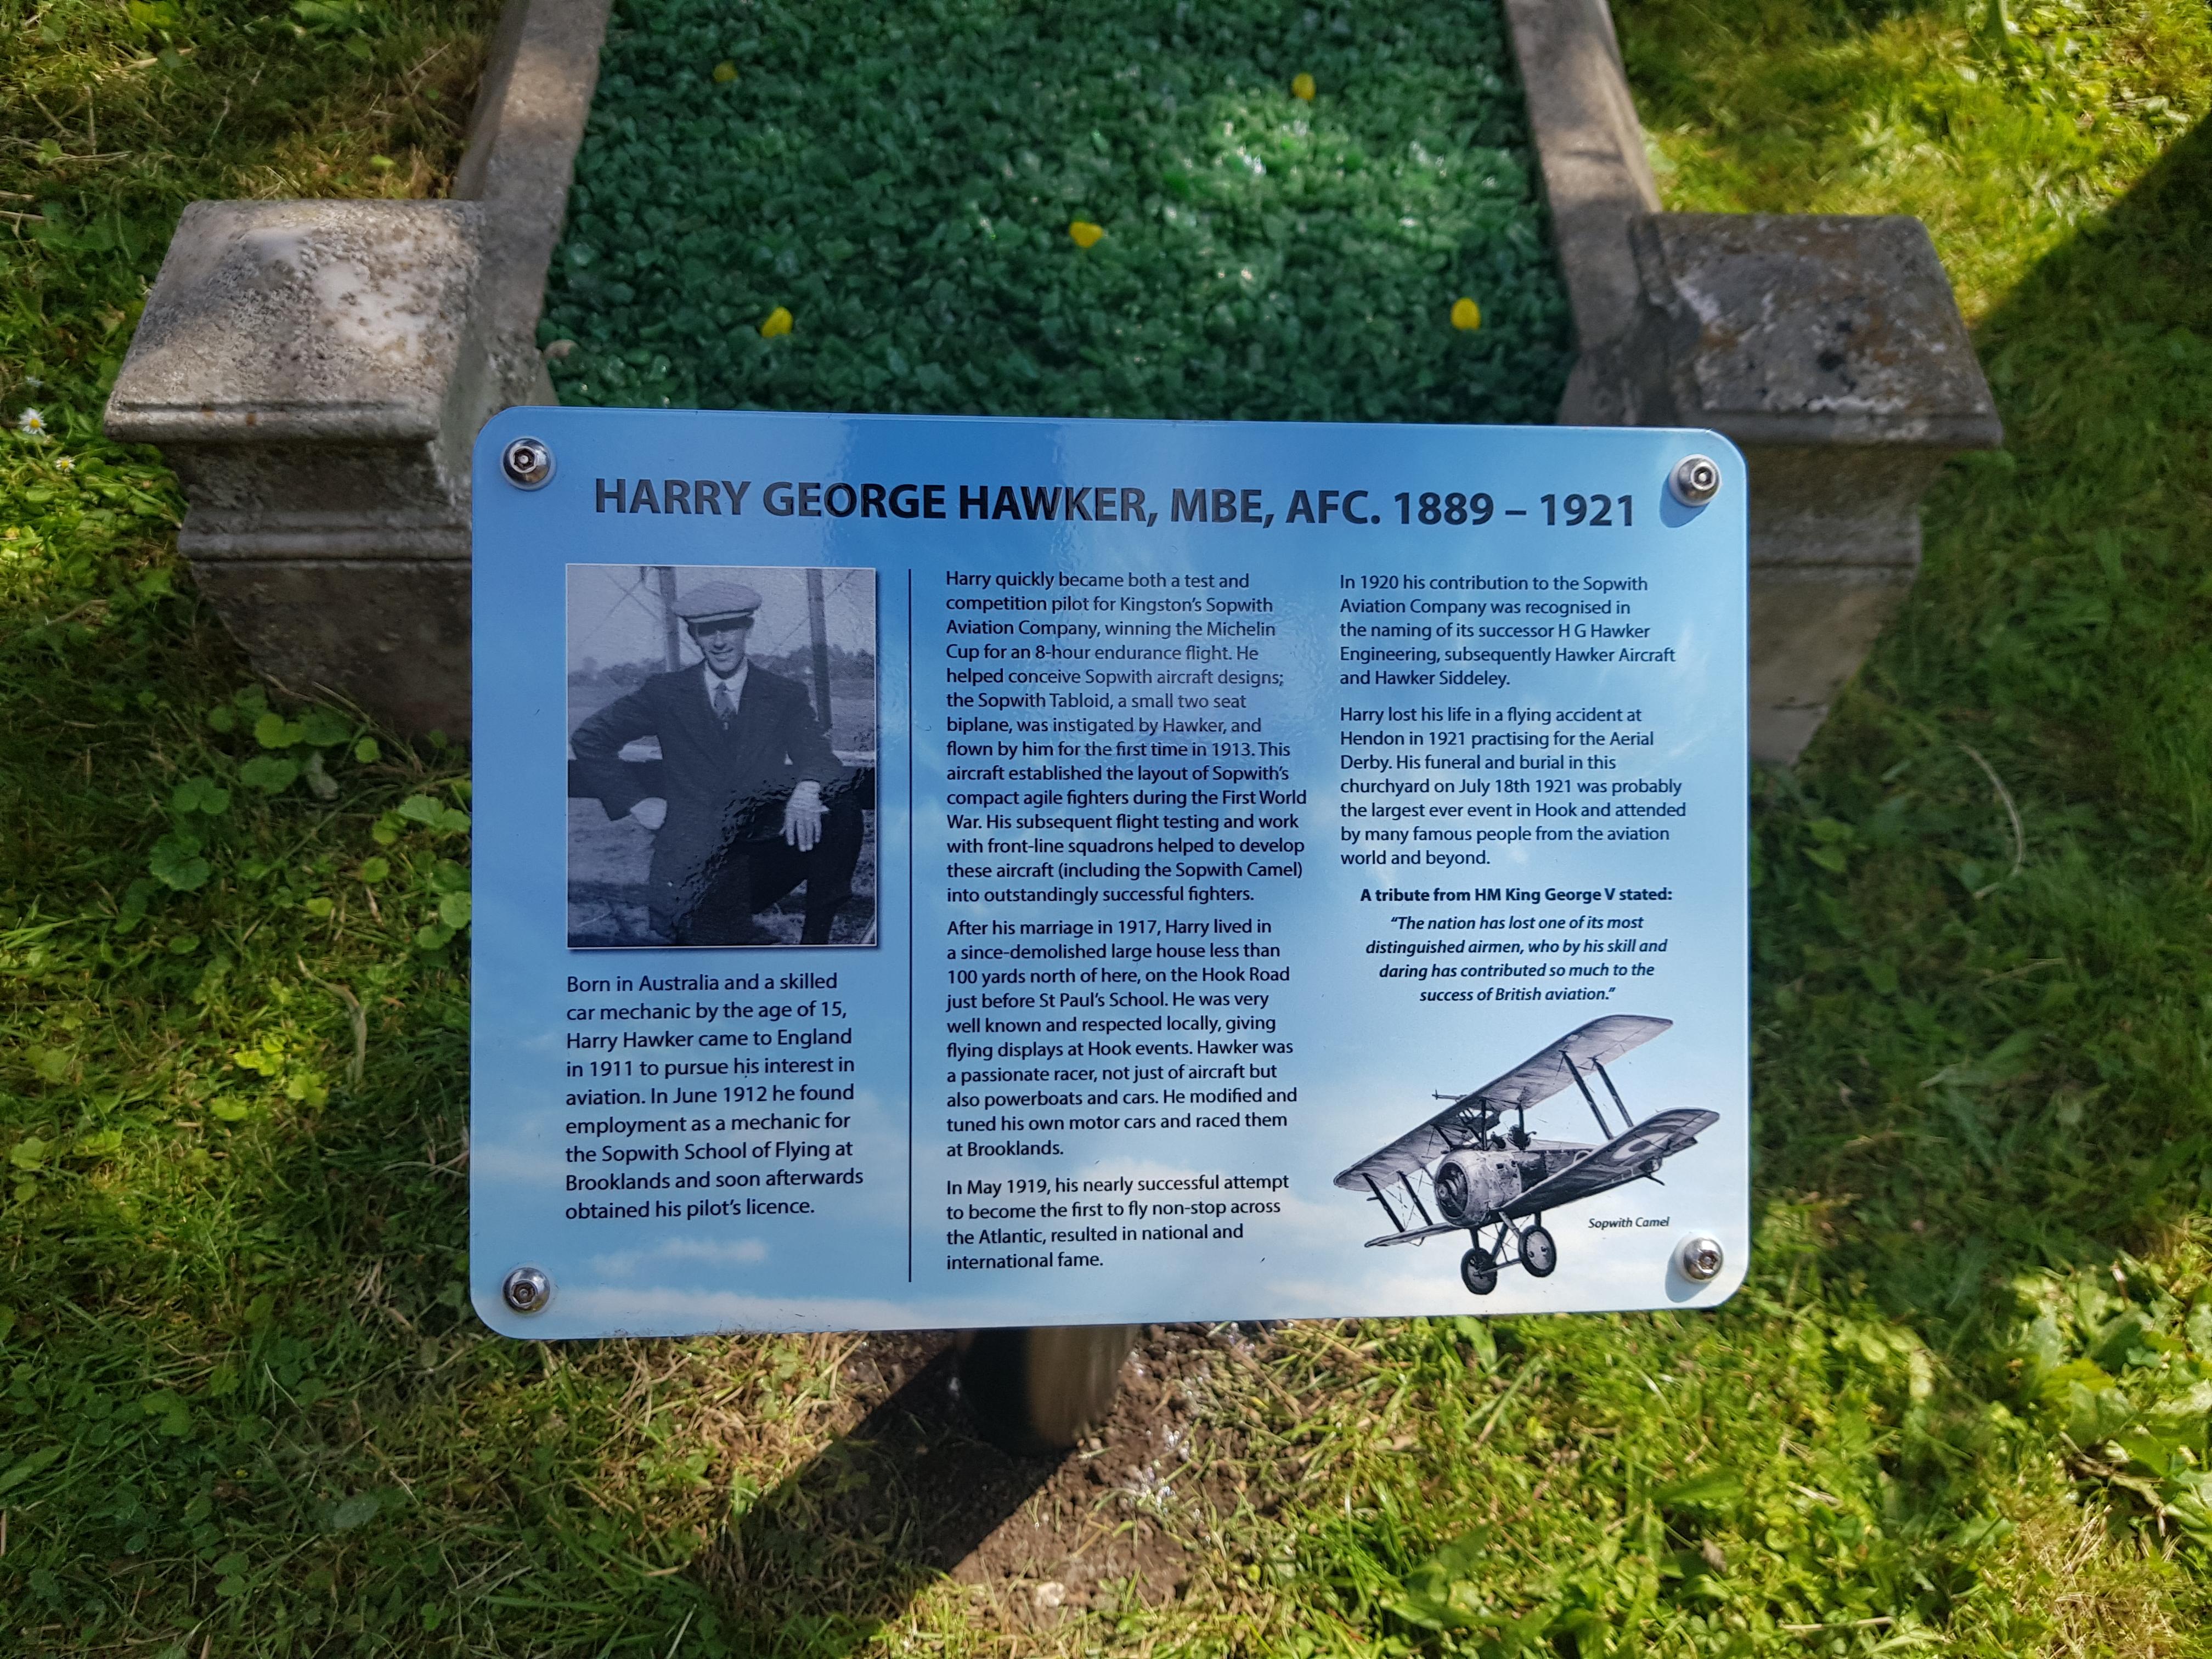 A sign at the grave of Harry Hawker MBE, with information on his life.